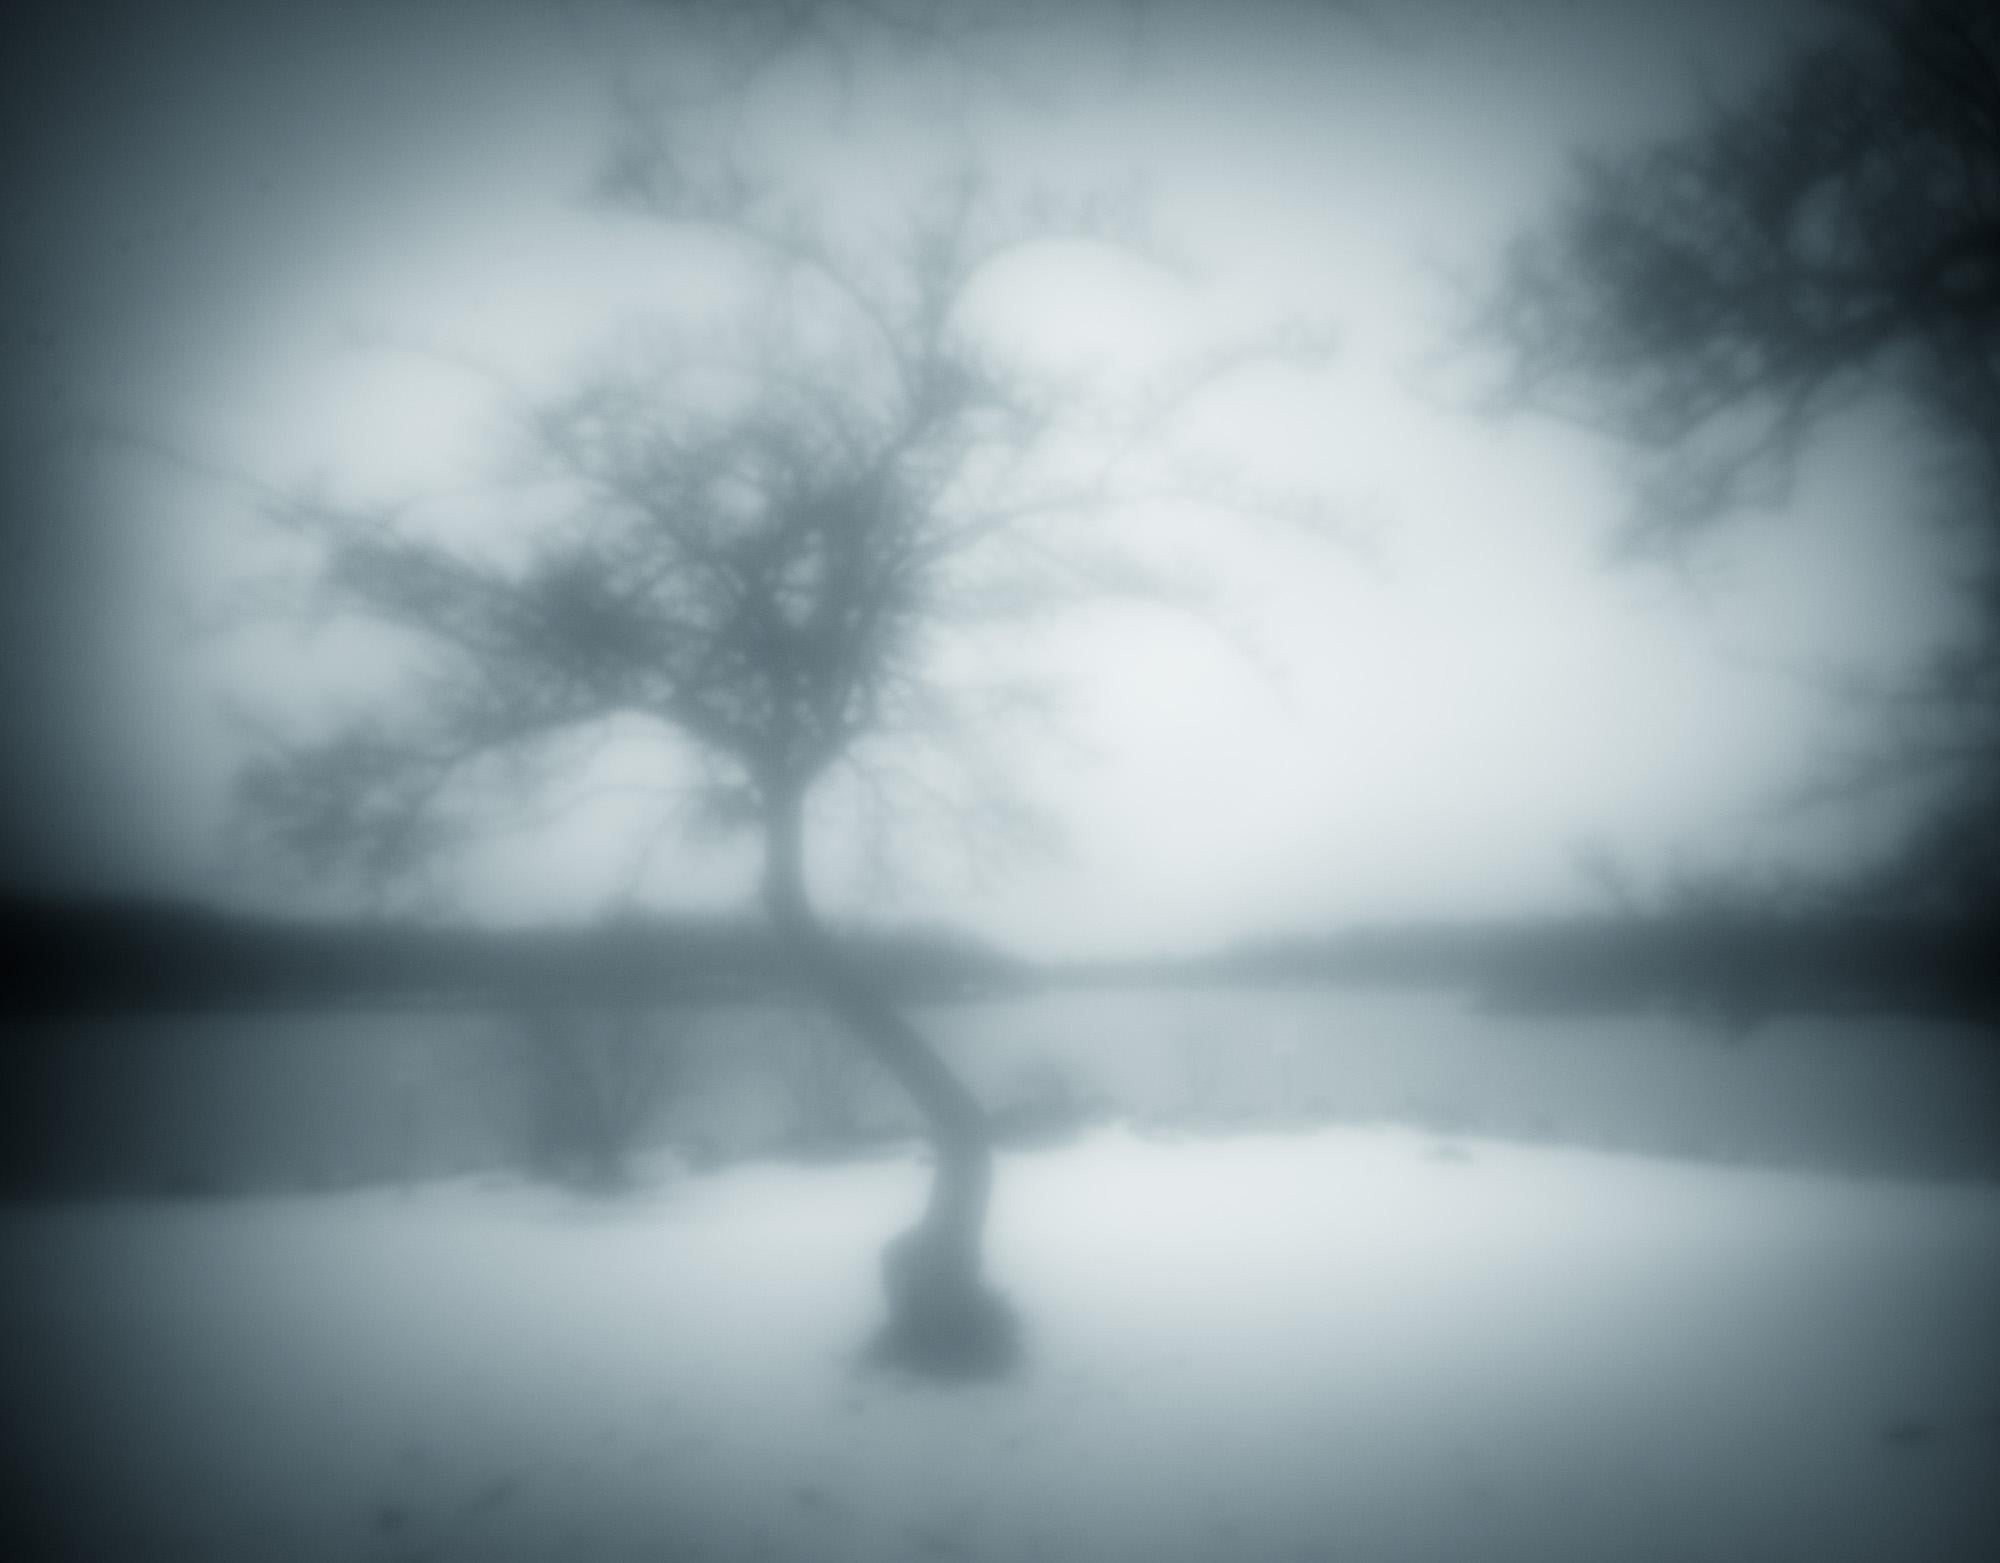 Howard Lewis Landscape Photograph - Limited Edition Black and White Photograph  "One Winter Tree" 20 x 24